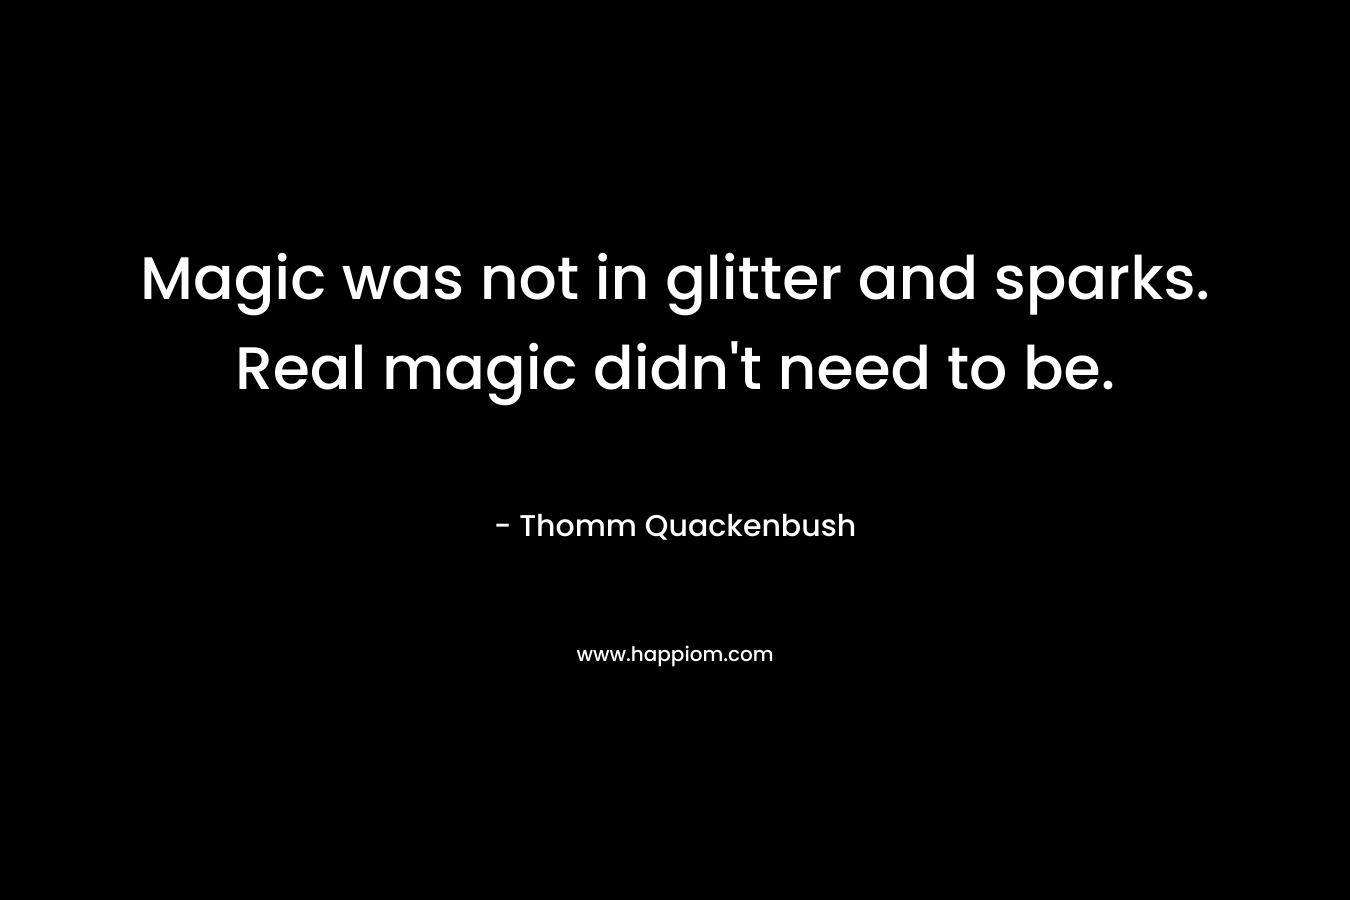 Magic was not in glitter and sparks. Real magic didn't need to be.